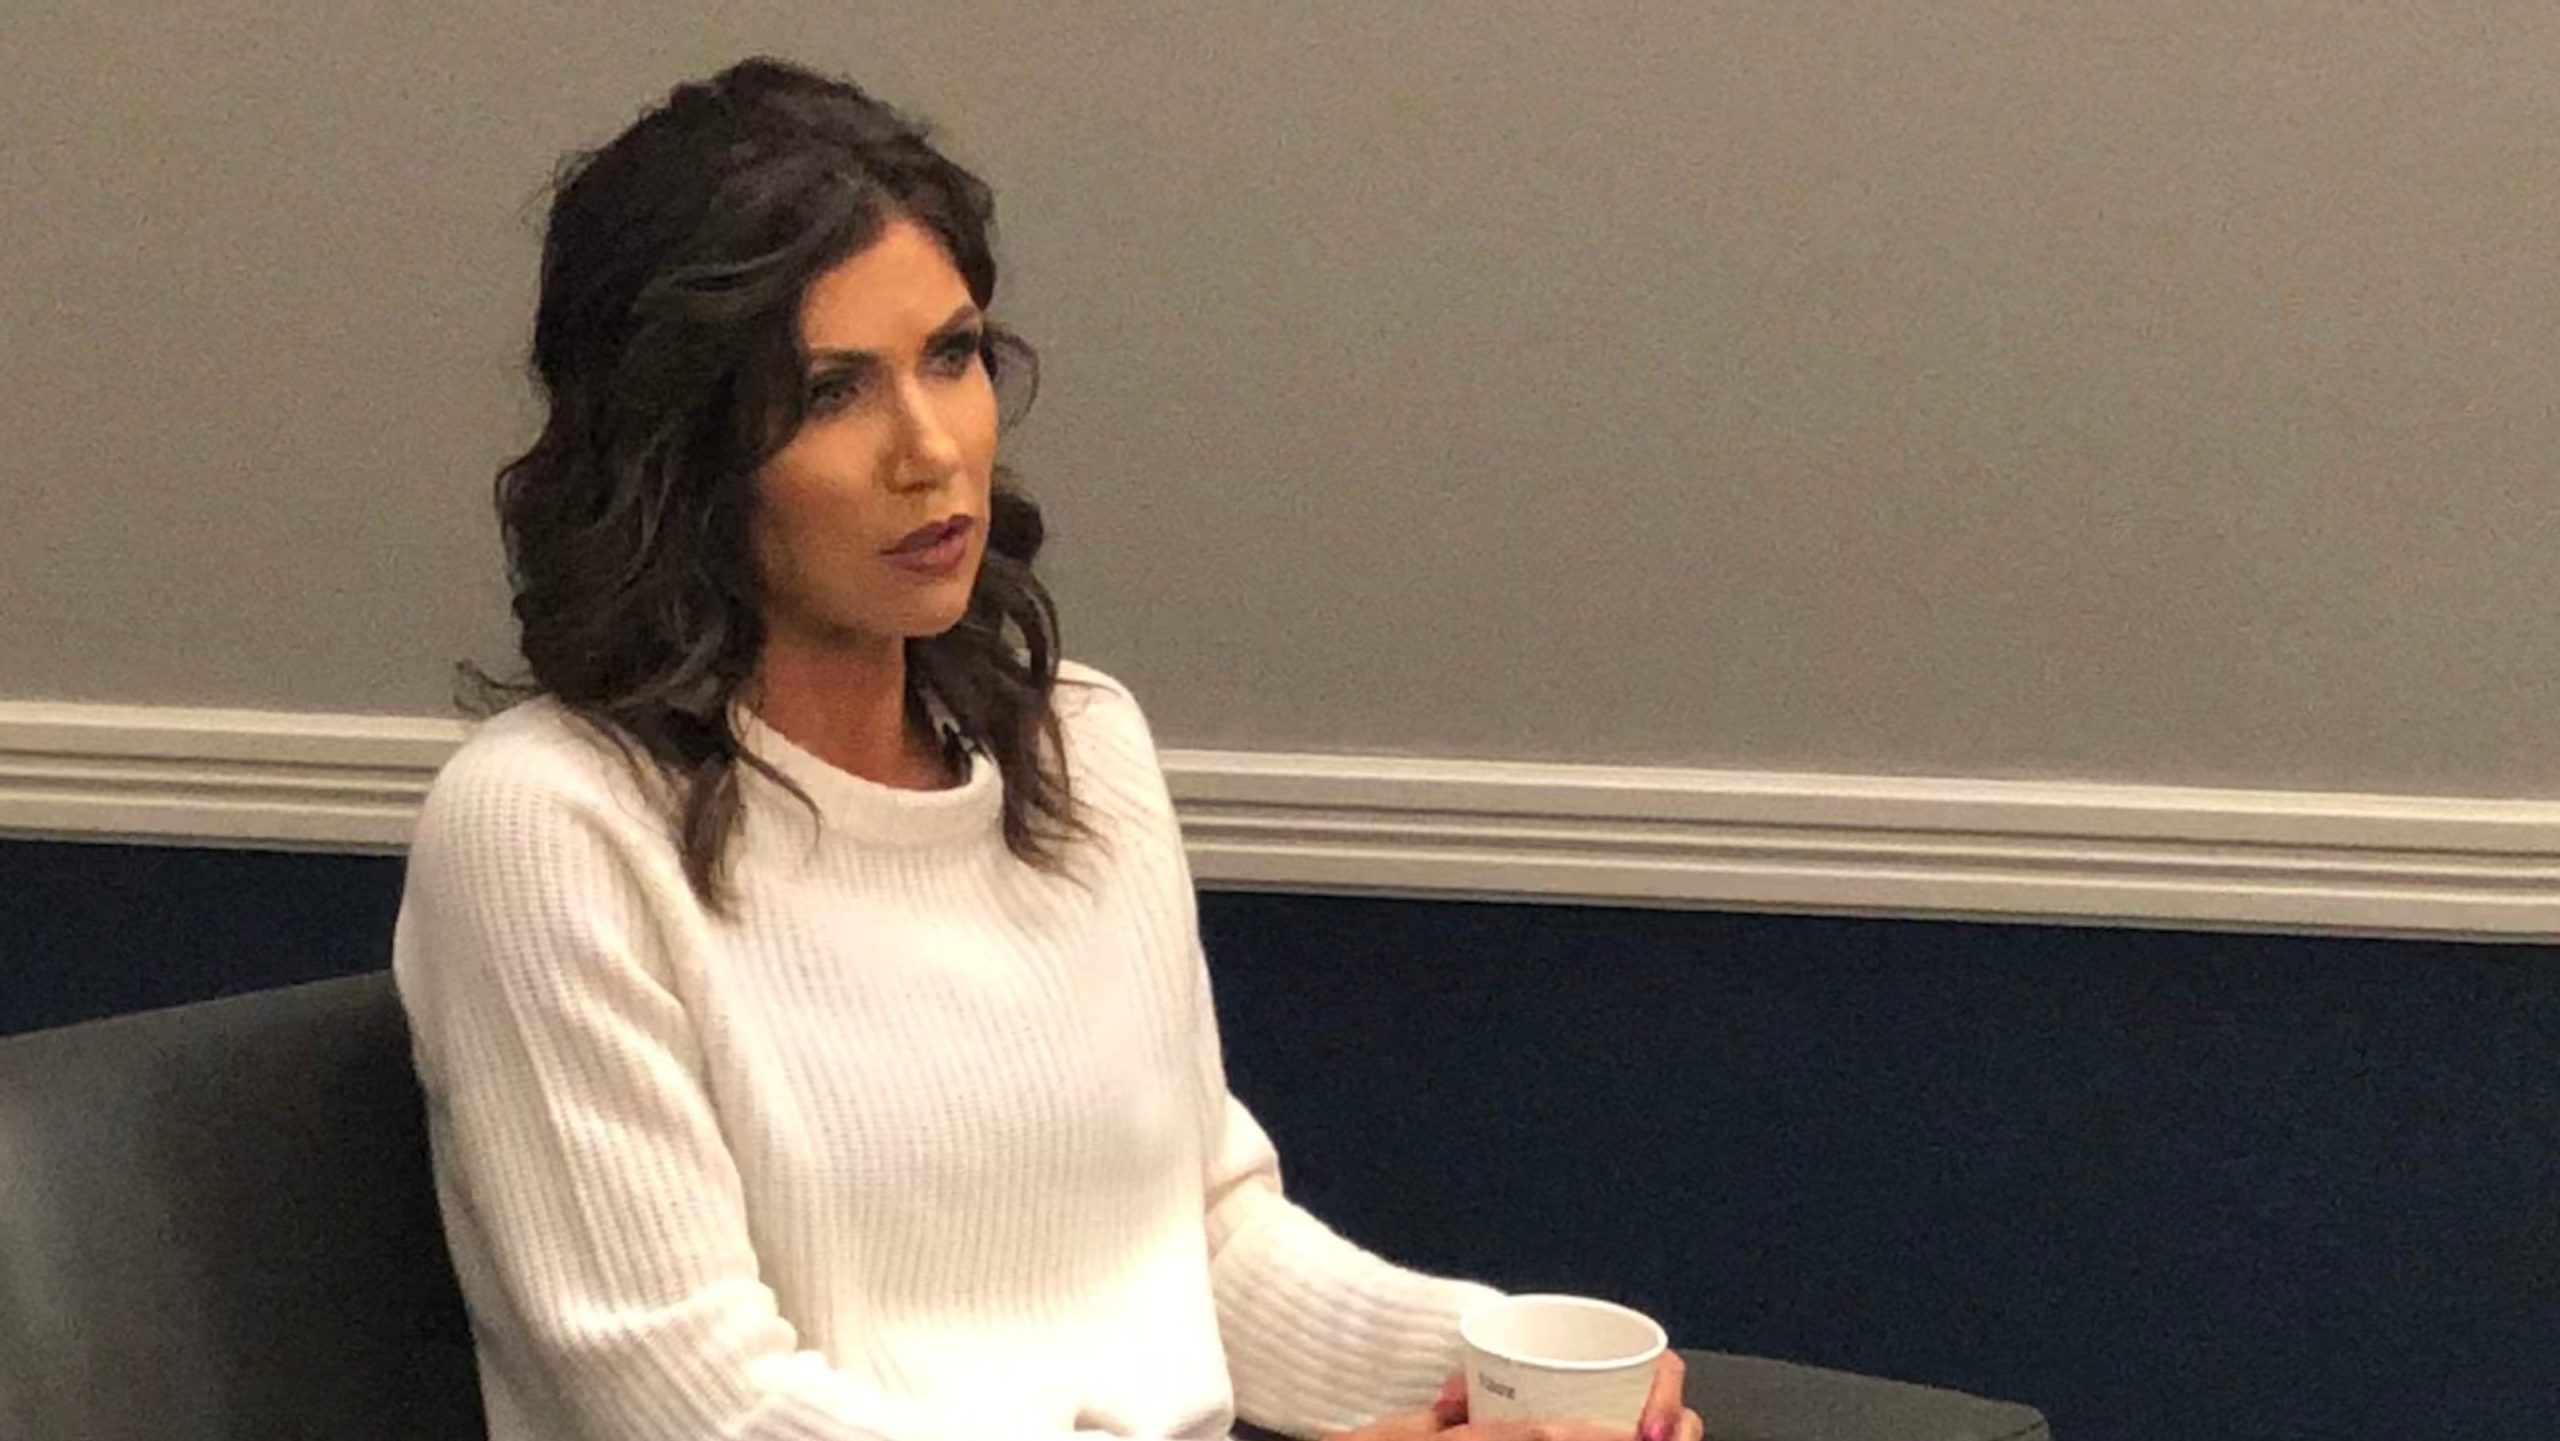 Personal freedom not part of Noem's thinking on legal pot in South Dakota